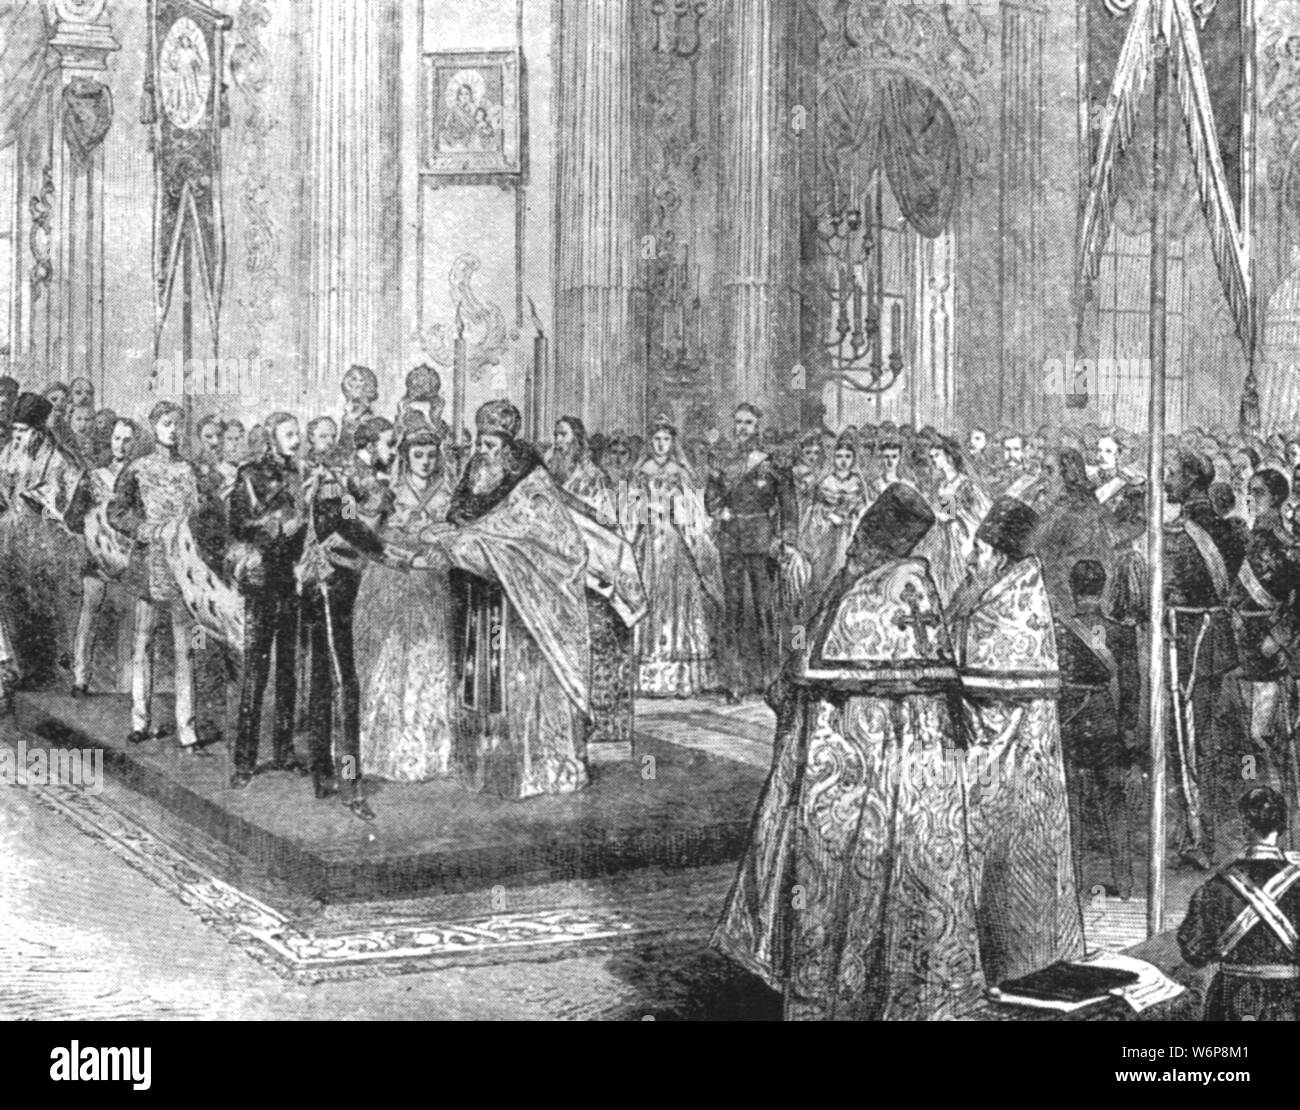 'The Marriage of The Duke of Edinburgh with The Grand Duchess Marie Alexandrovna, in The Winter Palace at St. Petersburg, January 23, 1874', (1901). Prince Alfred (1844-1900), son of Queen Victoria, married Maria Alexandrovna of Russia (1853-1920) in an Orthodox service at the Grand Church of the Winter Palace, St Petersburg, Russia. From &quot;The Illustrated London News Record of the Glorious Reign of Queen Victoria 1837-1901: The Life and Accession of King Edward VII. and the Life of Queen Alexandra&quot;. [London, 1901] Stock Photo